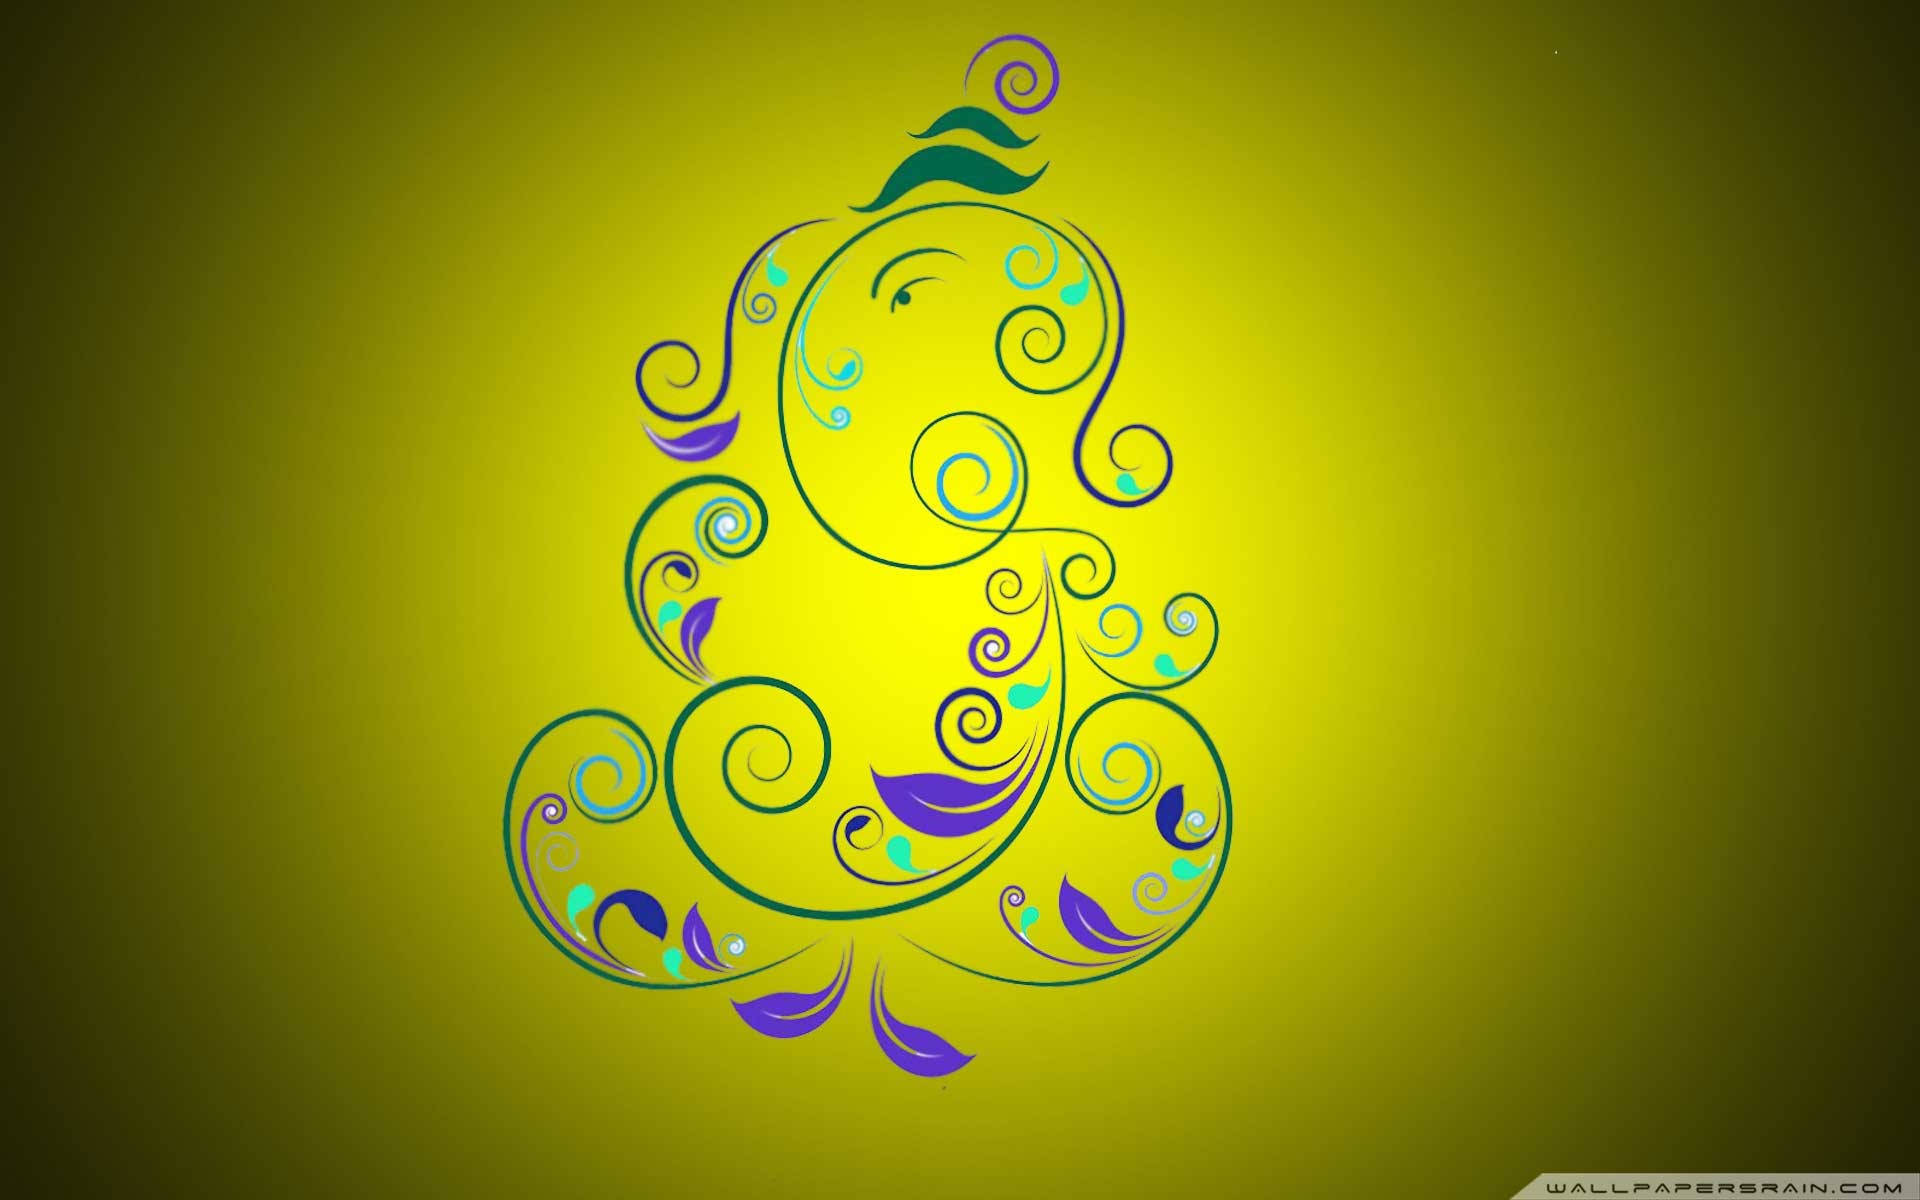 Lord Ganesha In Yellow Vignette Background